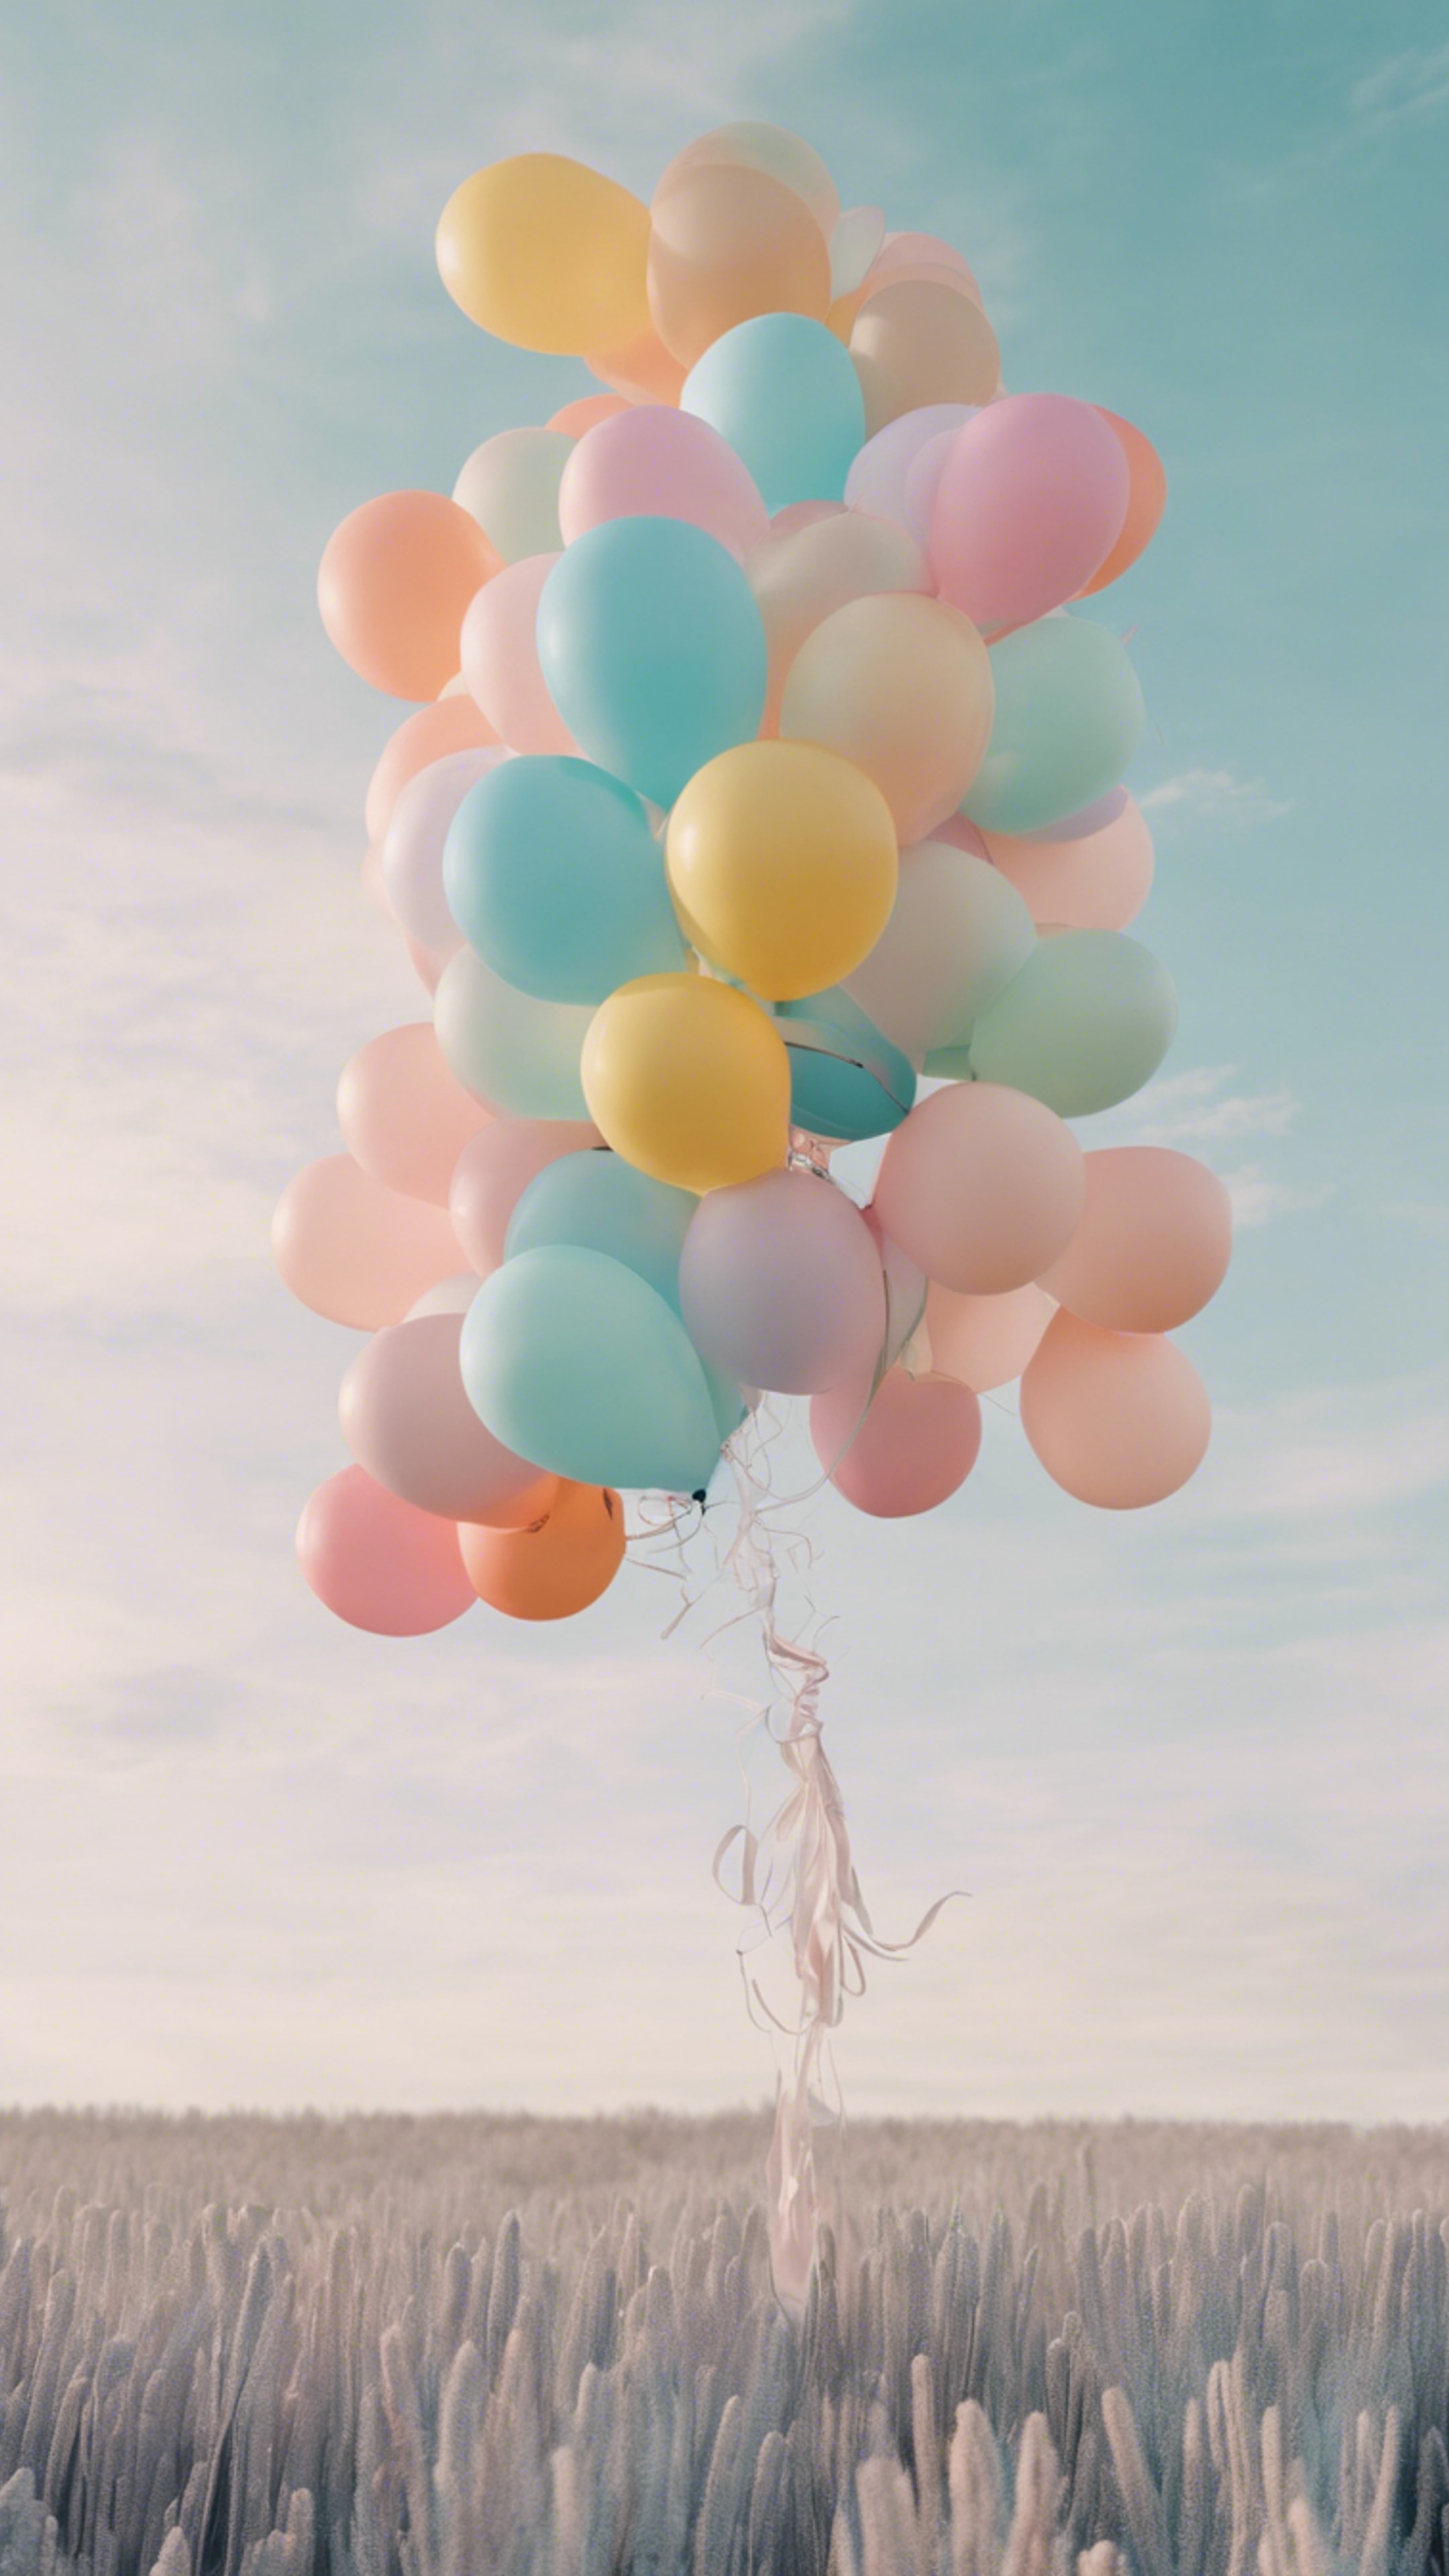 A cool pastel colored cluster of balloons floating in a clear sky. Tapéta[294975c578db48368ab8]